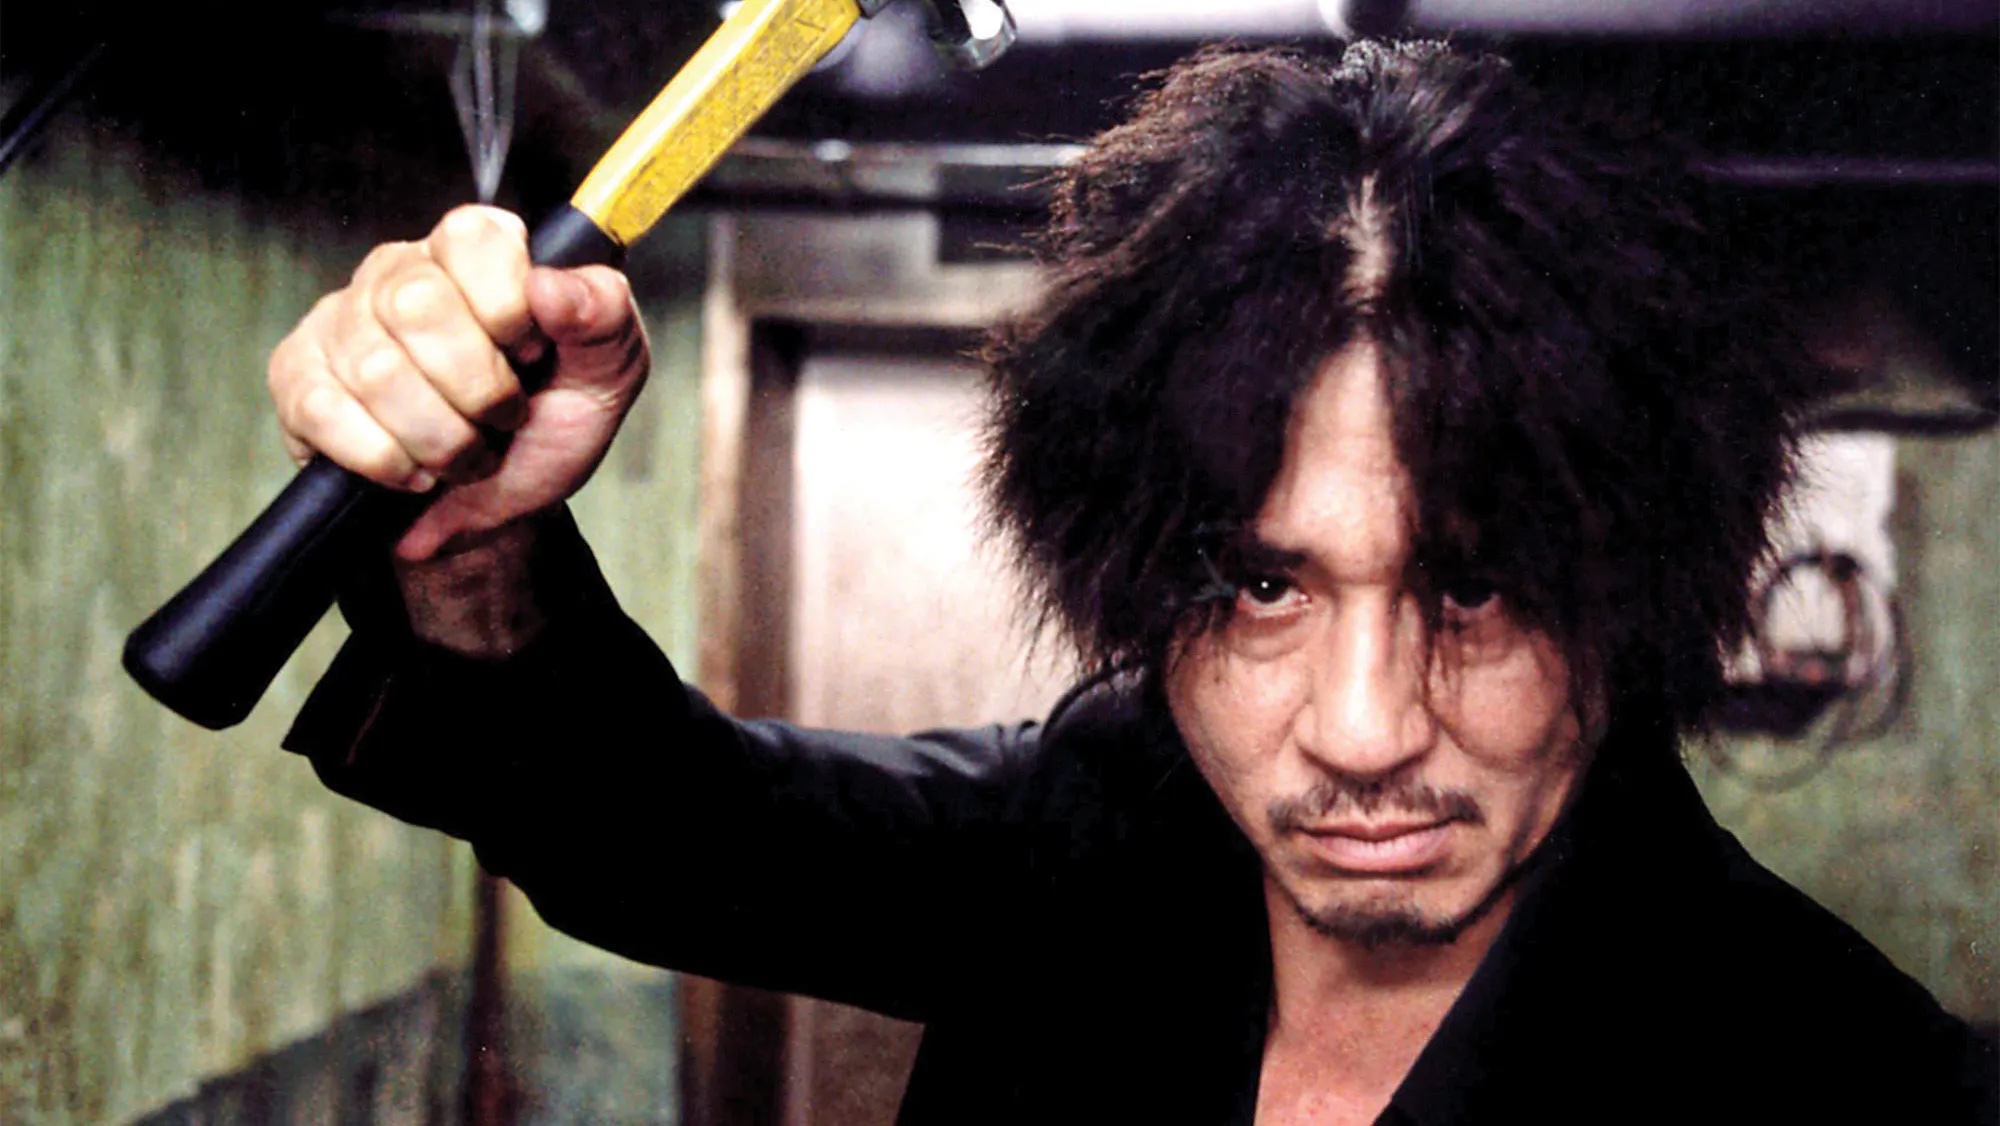 Oh Dae-su (Choi Min-sik), a wild-haired man holding a hammer menacingly over his head, glares into the camera in Oldboy